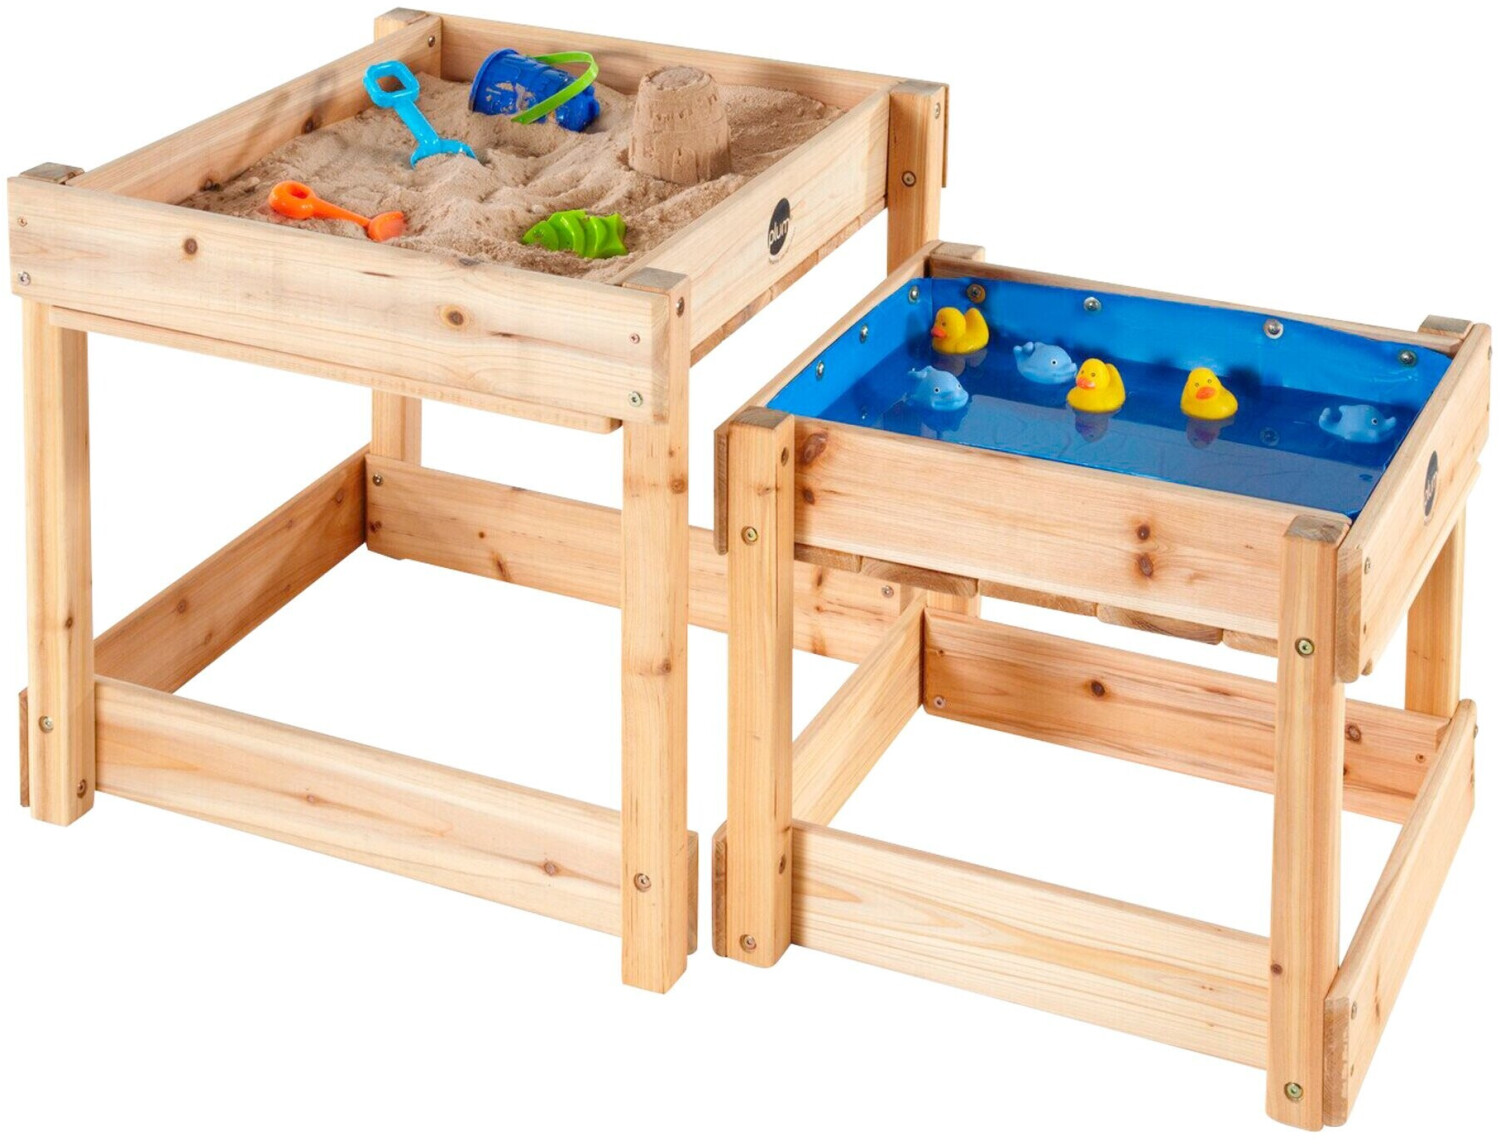 Plum Sandy Bay Wooden Sand And Water Pit Tables